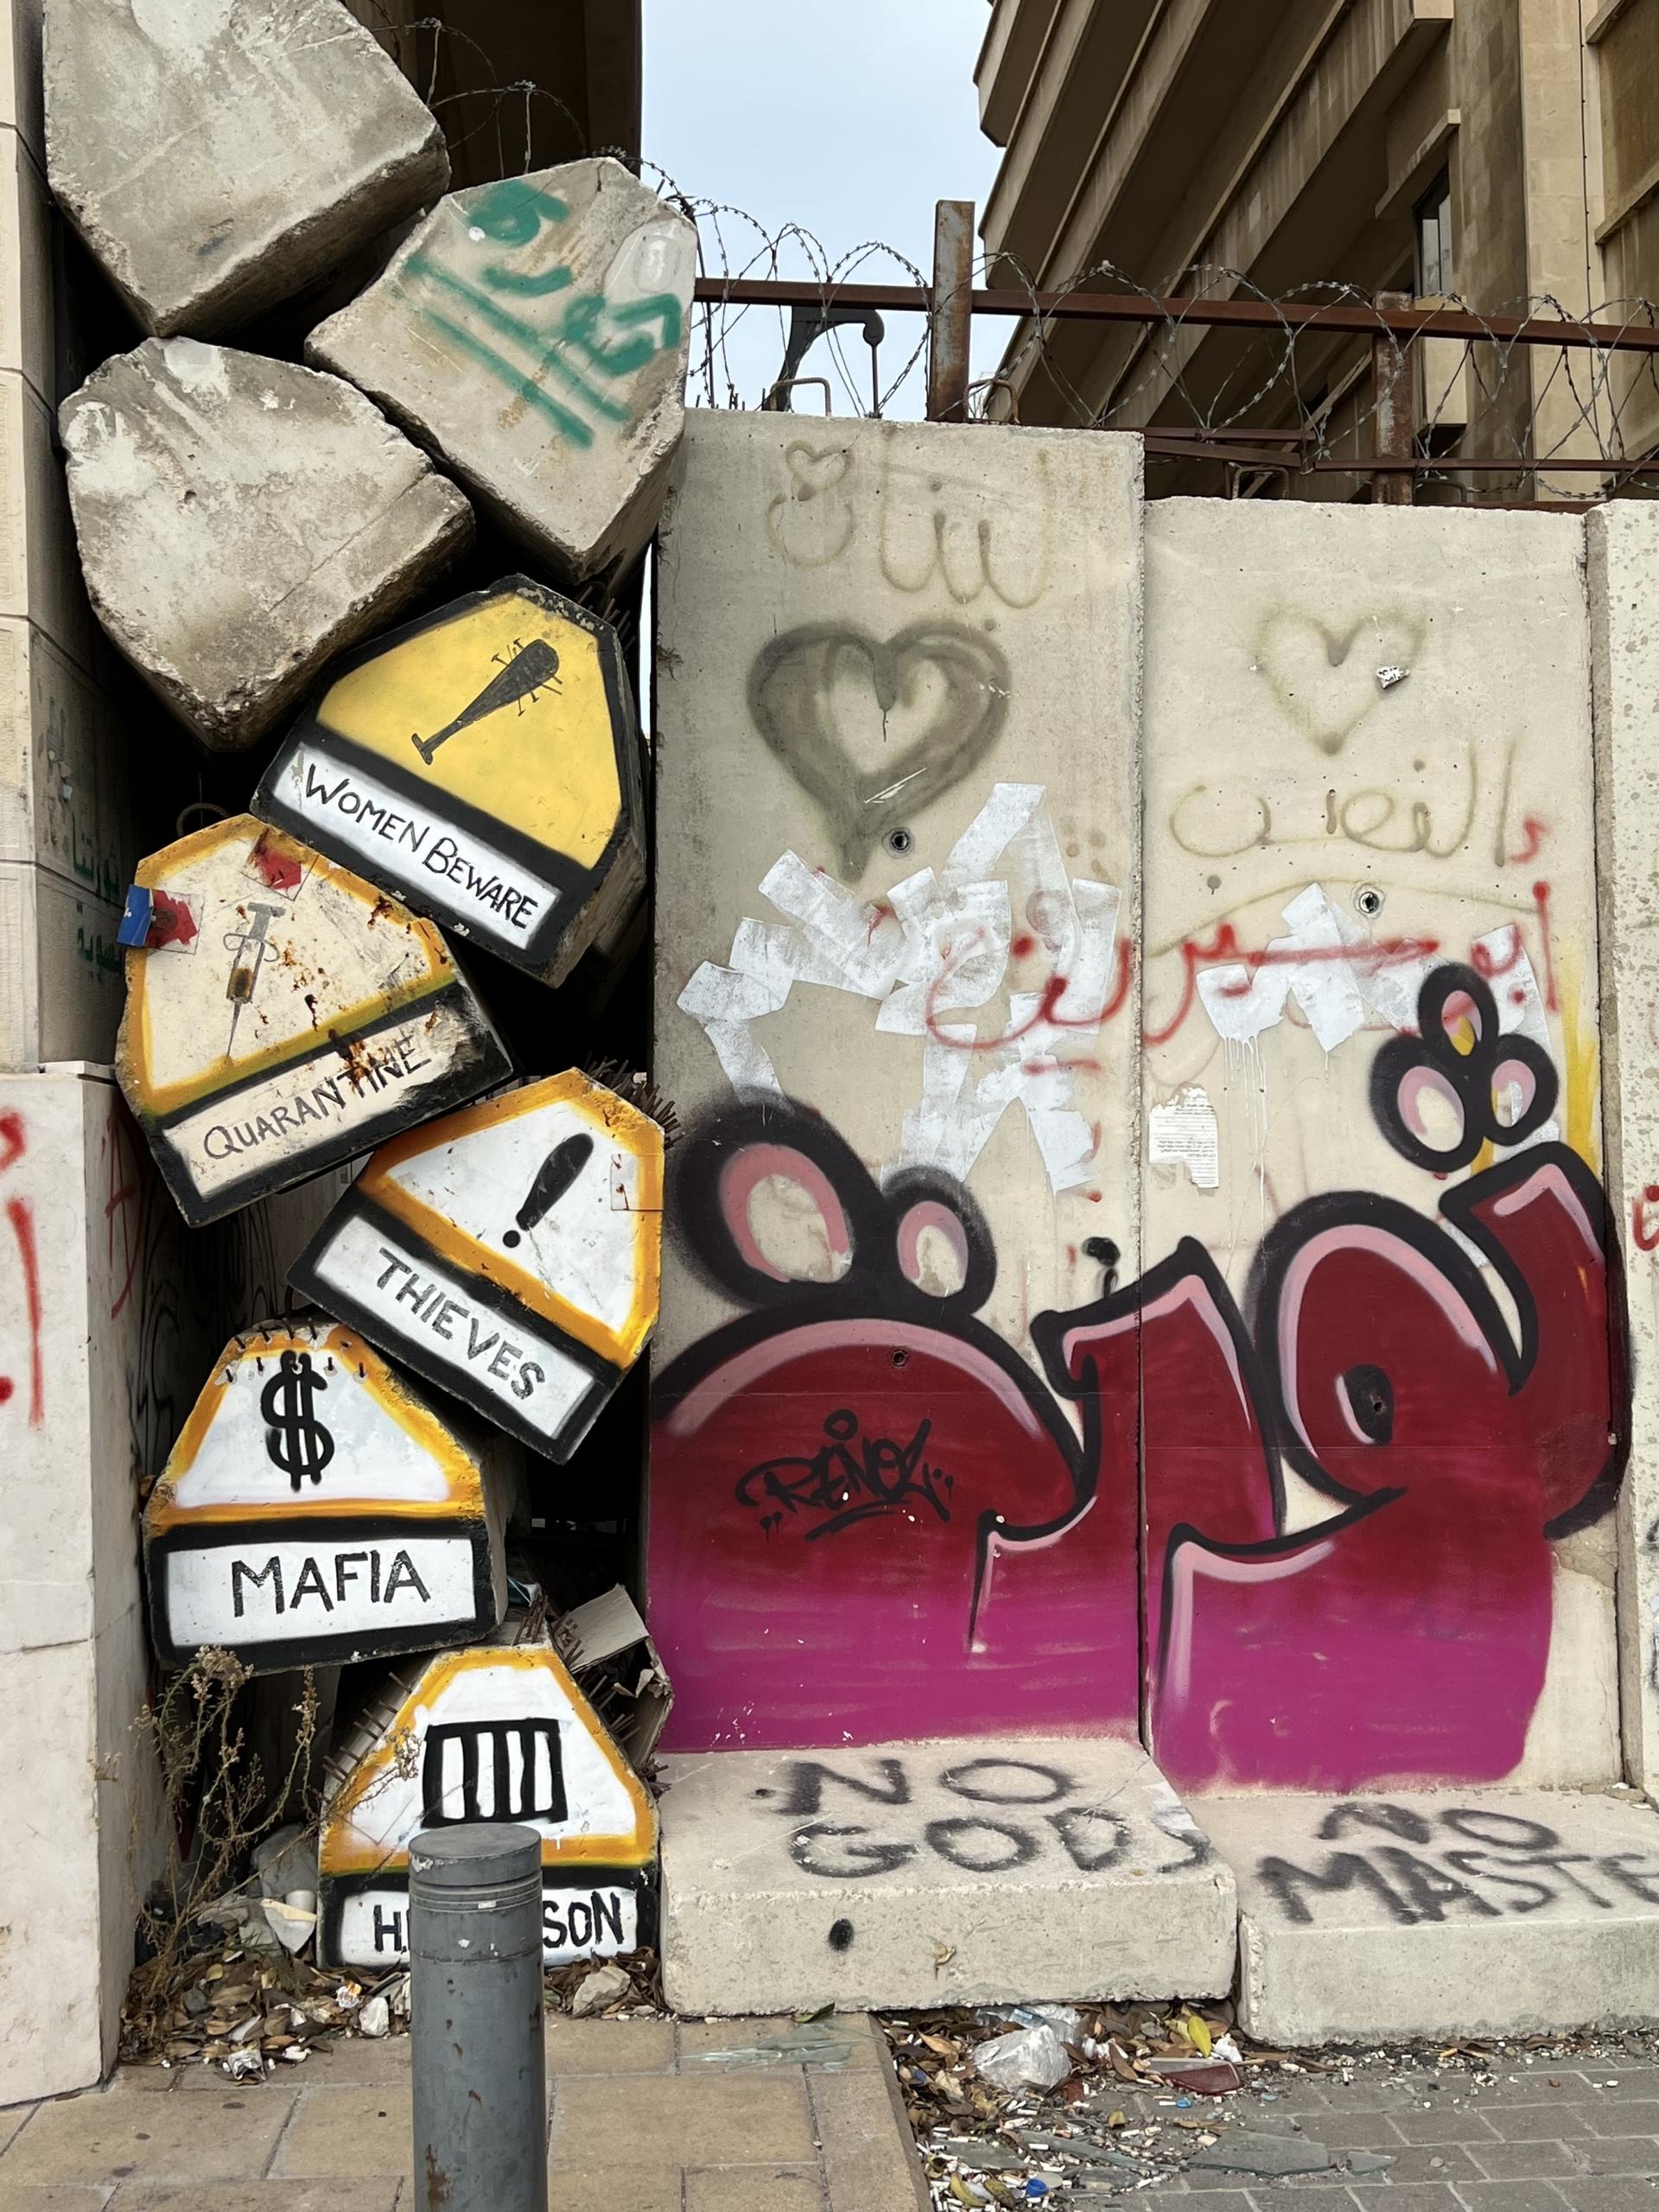 Graffiti from the 2019 protests in Beirut, Lebanon reads “Revolution”.